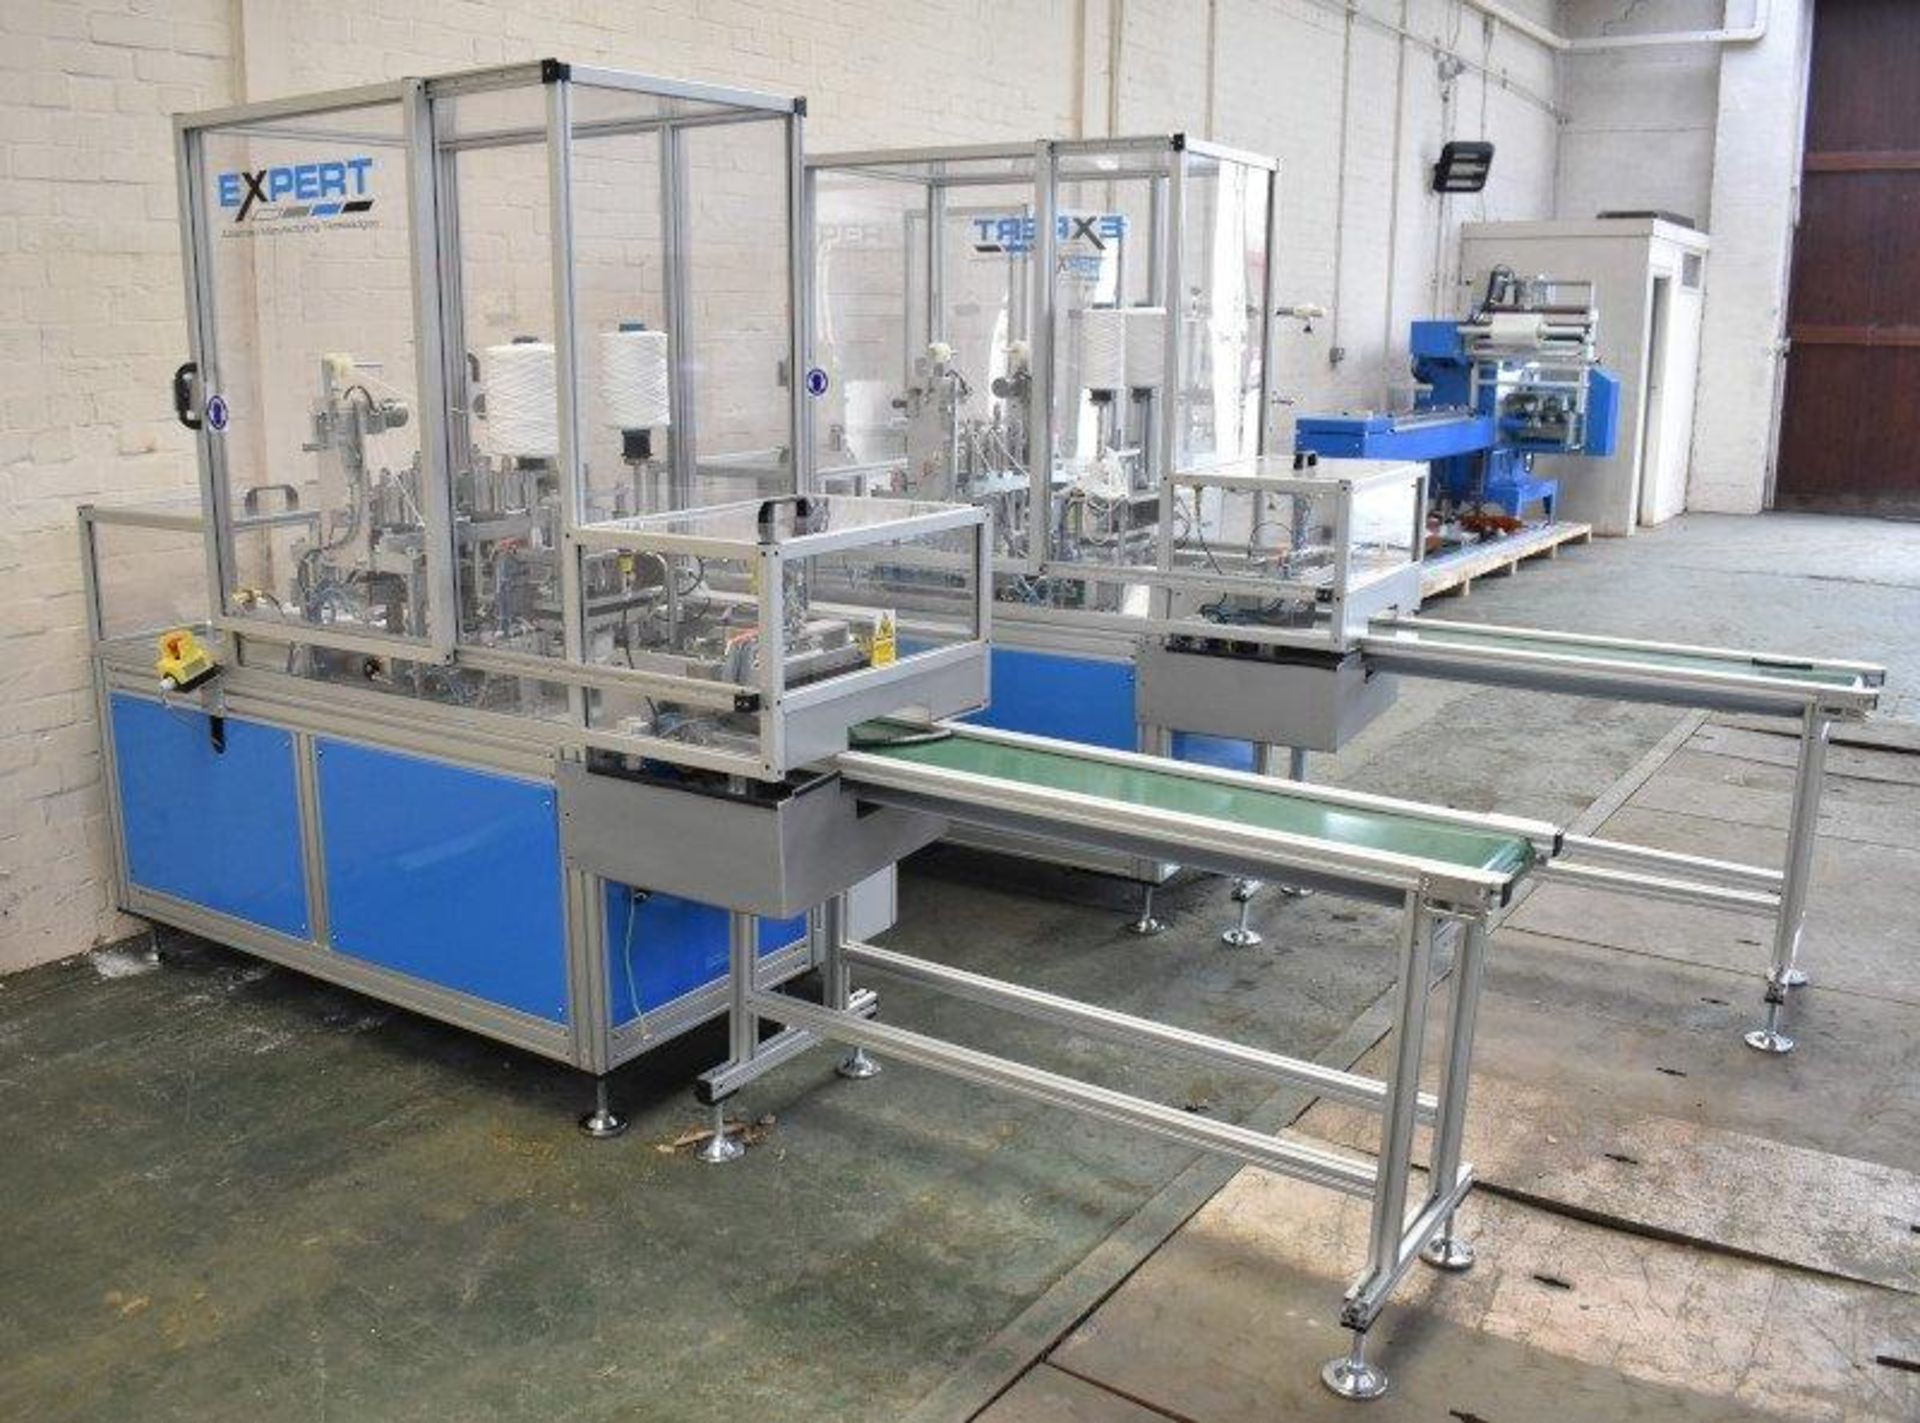 Expert fully automated Mask Making Machine including an Ilapak Smart flow wrapping packaging machine - Image 16 of 28